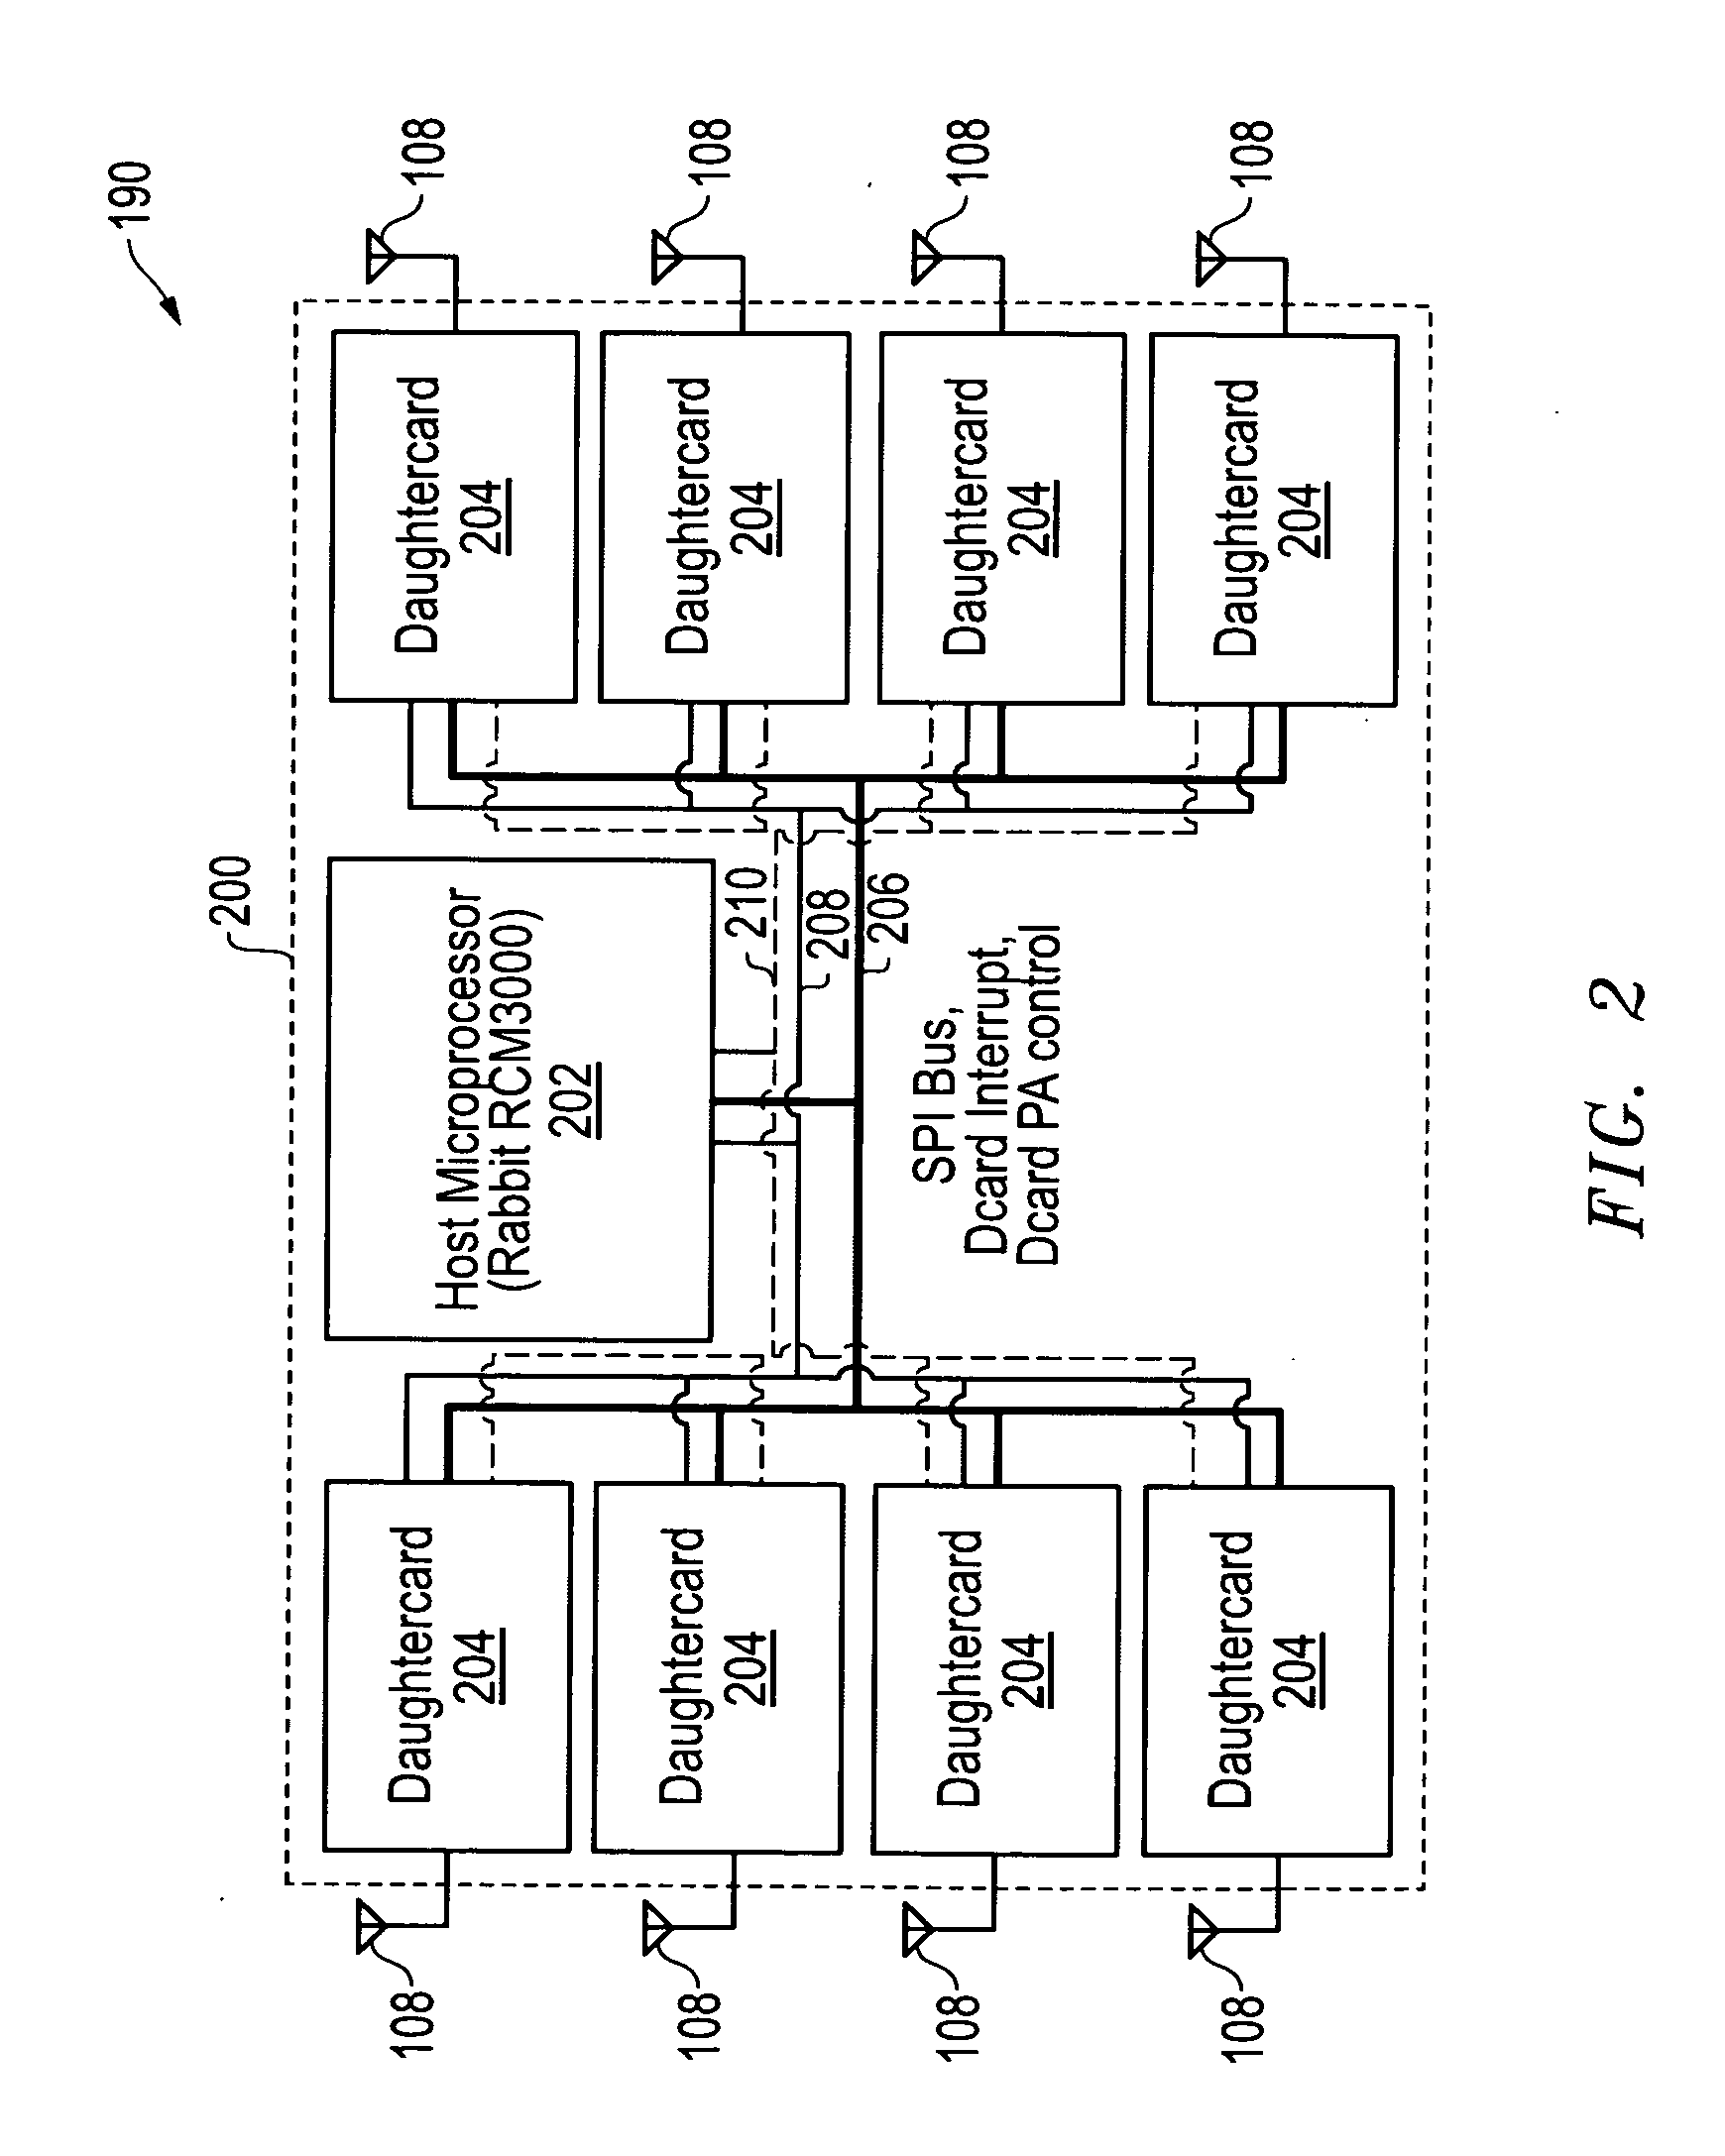 Data separation in high density environments